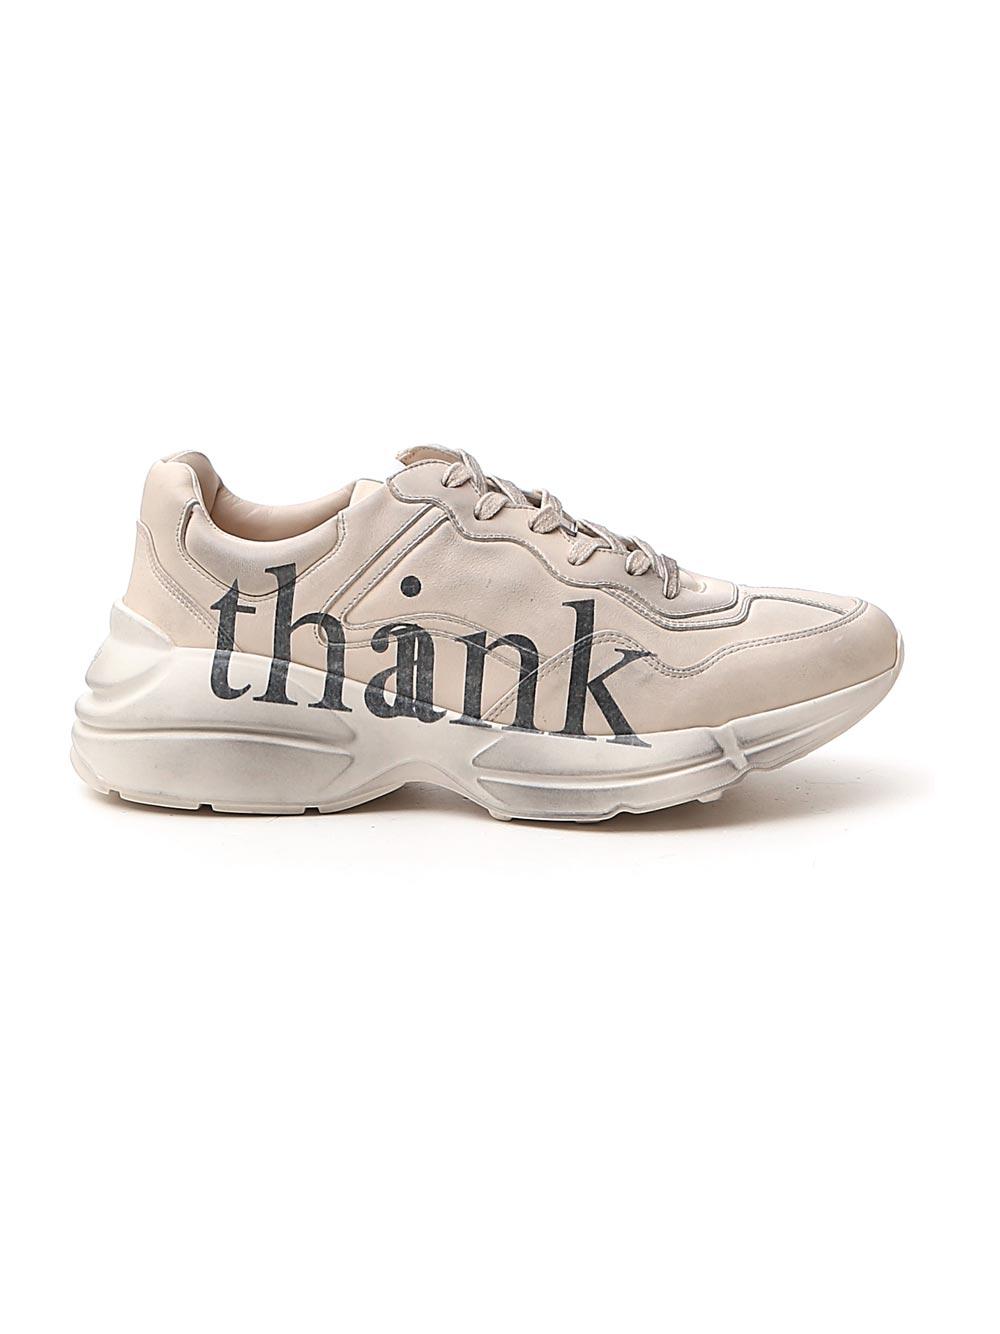 Gucci Wool 'think/thank' Print Rhyton Sneaker in Grey (White) for 